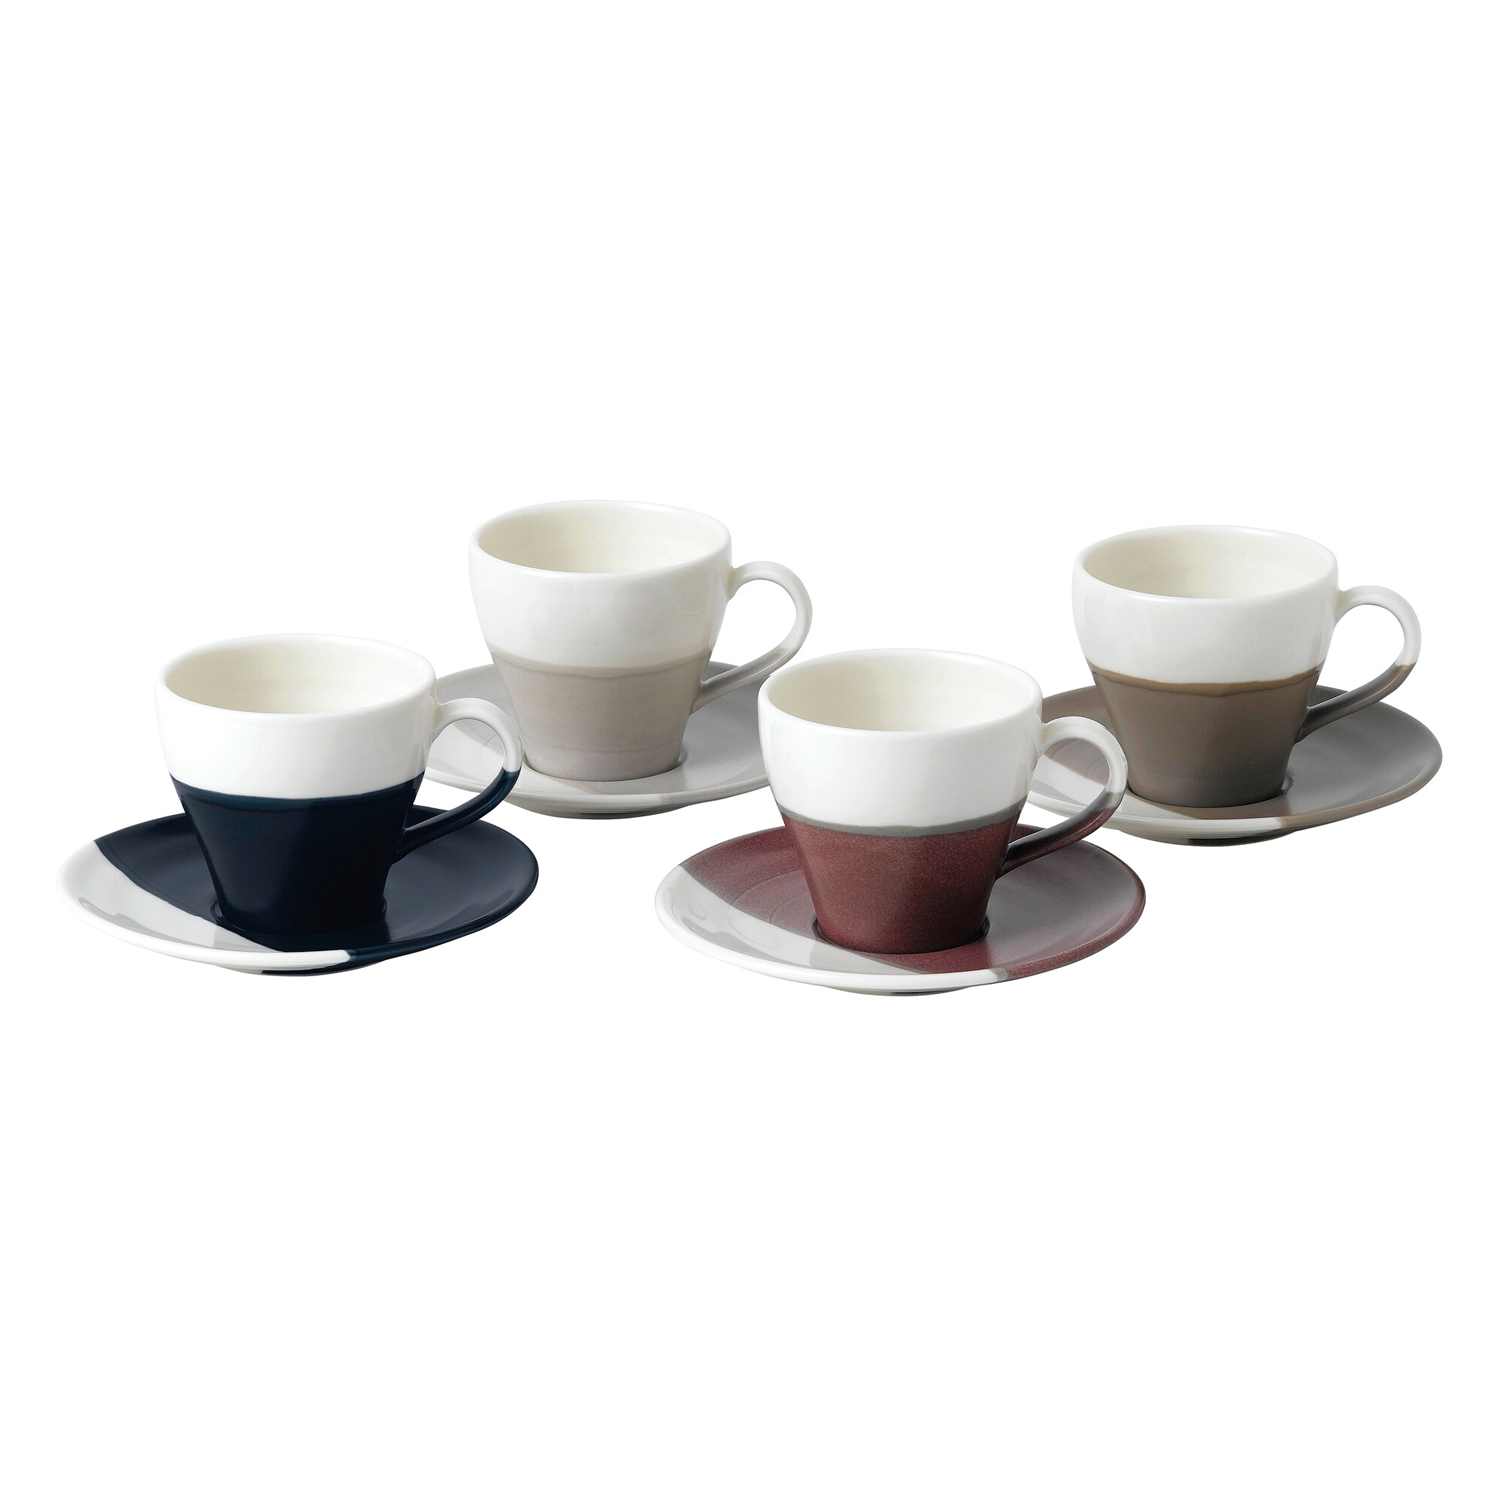 https://api-prod.royaldesign.se/api/products/image/2/royal-doulton-coffee-studio-espresso-cups-and-saucers-4-pack-0